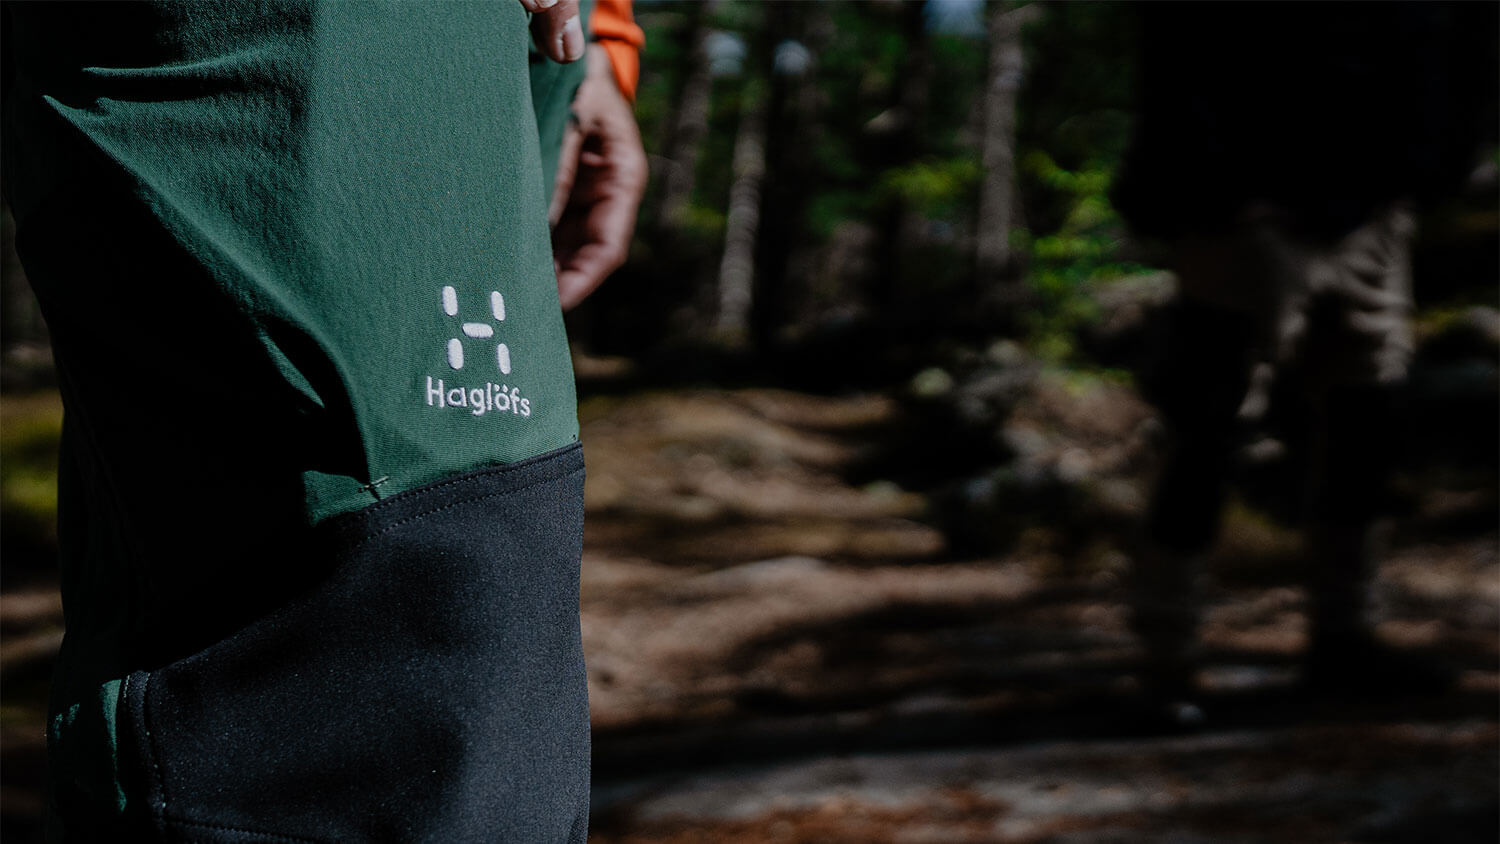 More choice and yet easy to choose outdoor pants with Haglöfs